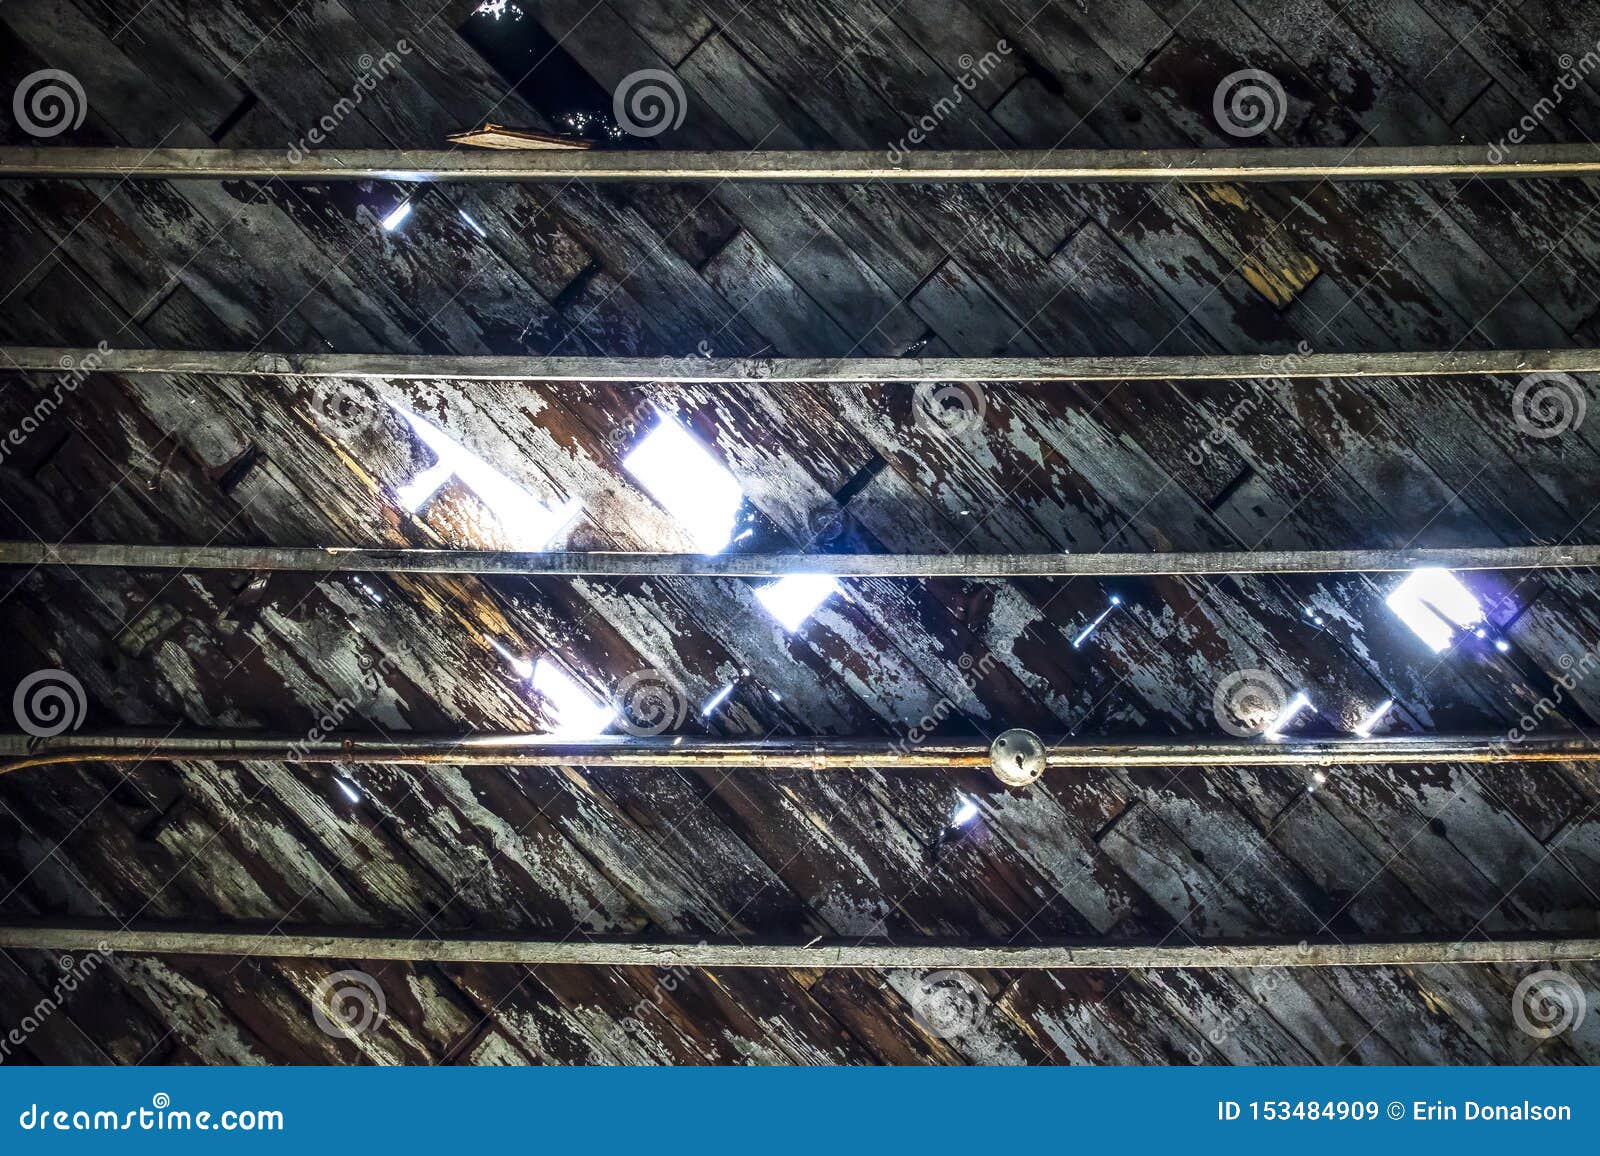 Light Through Peeling And Deteriorating Wooden Ceiling Stock Image